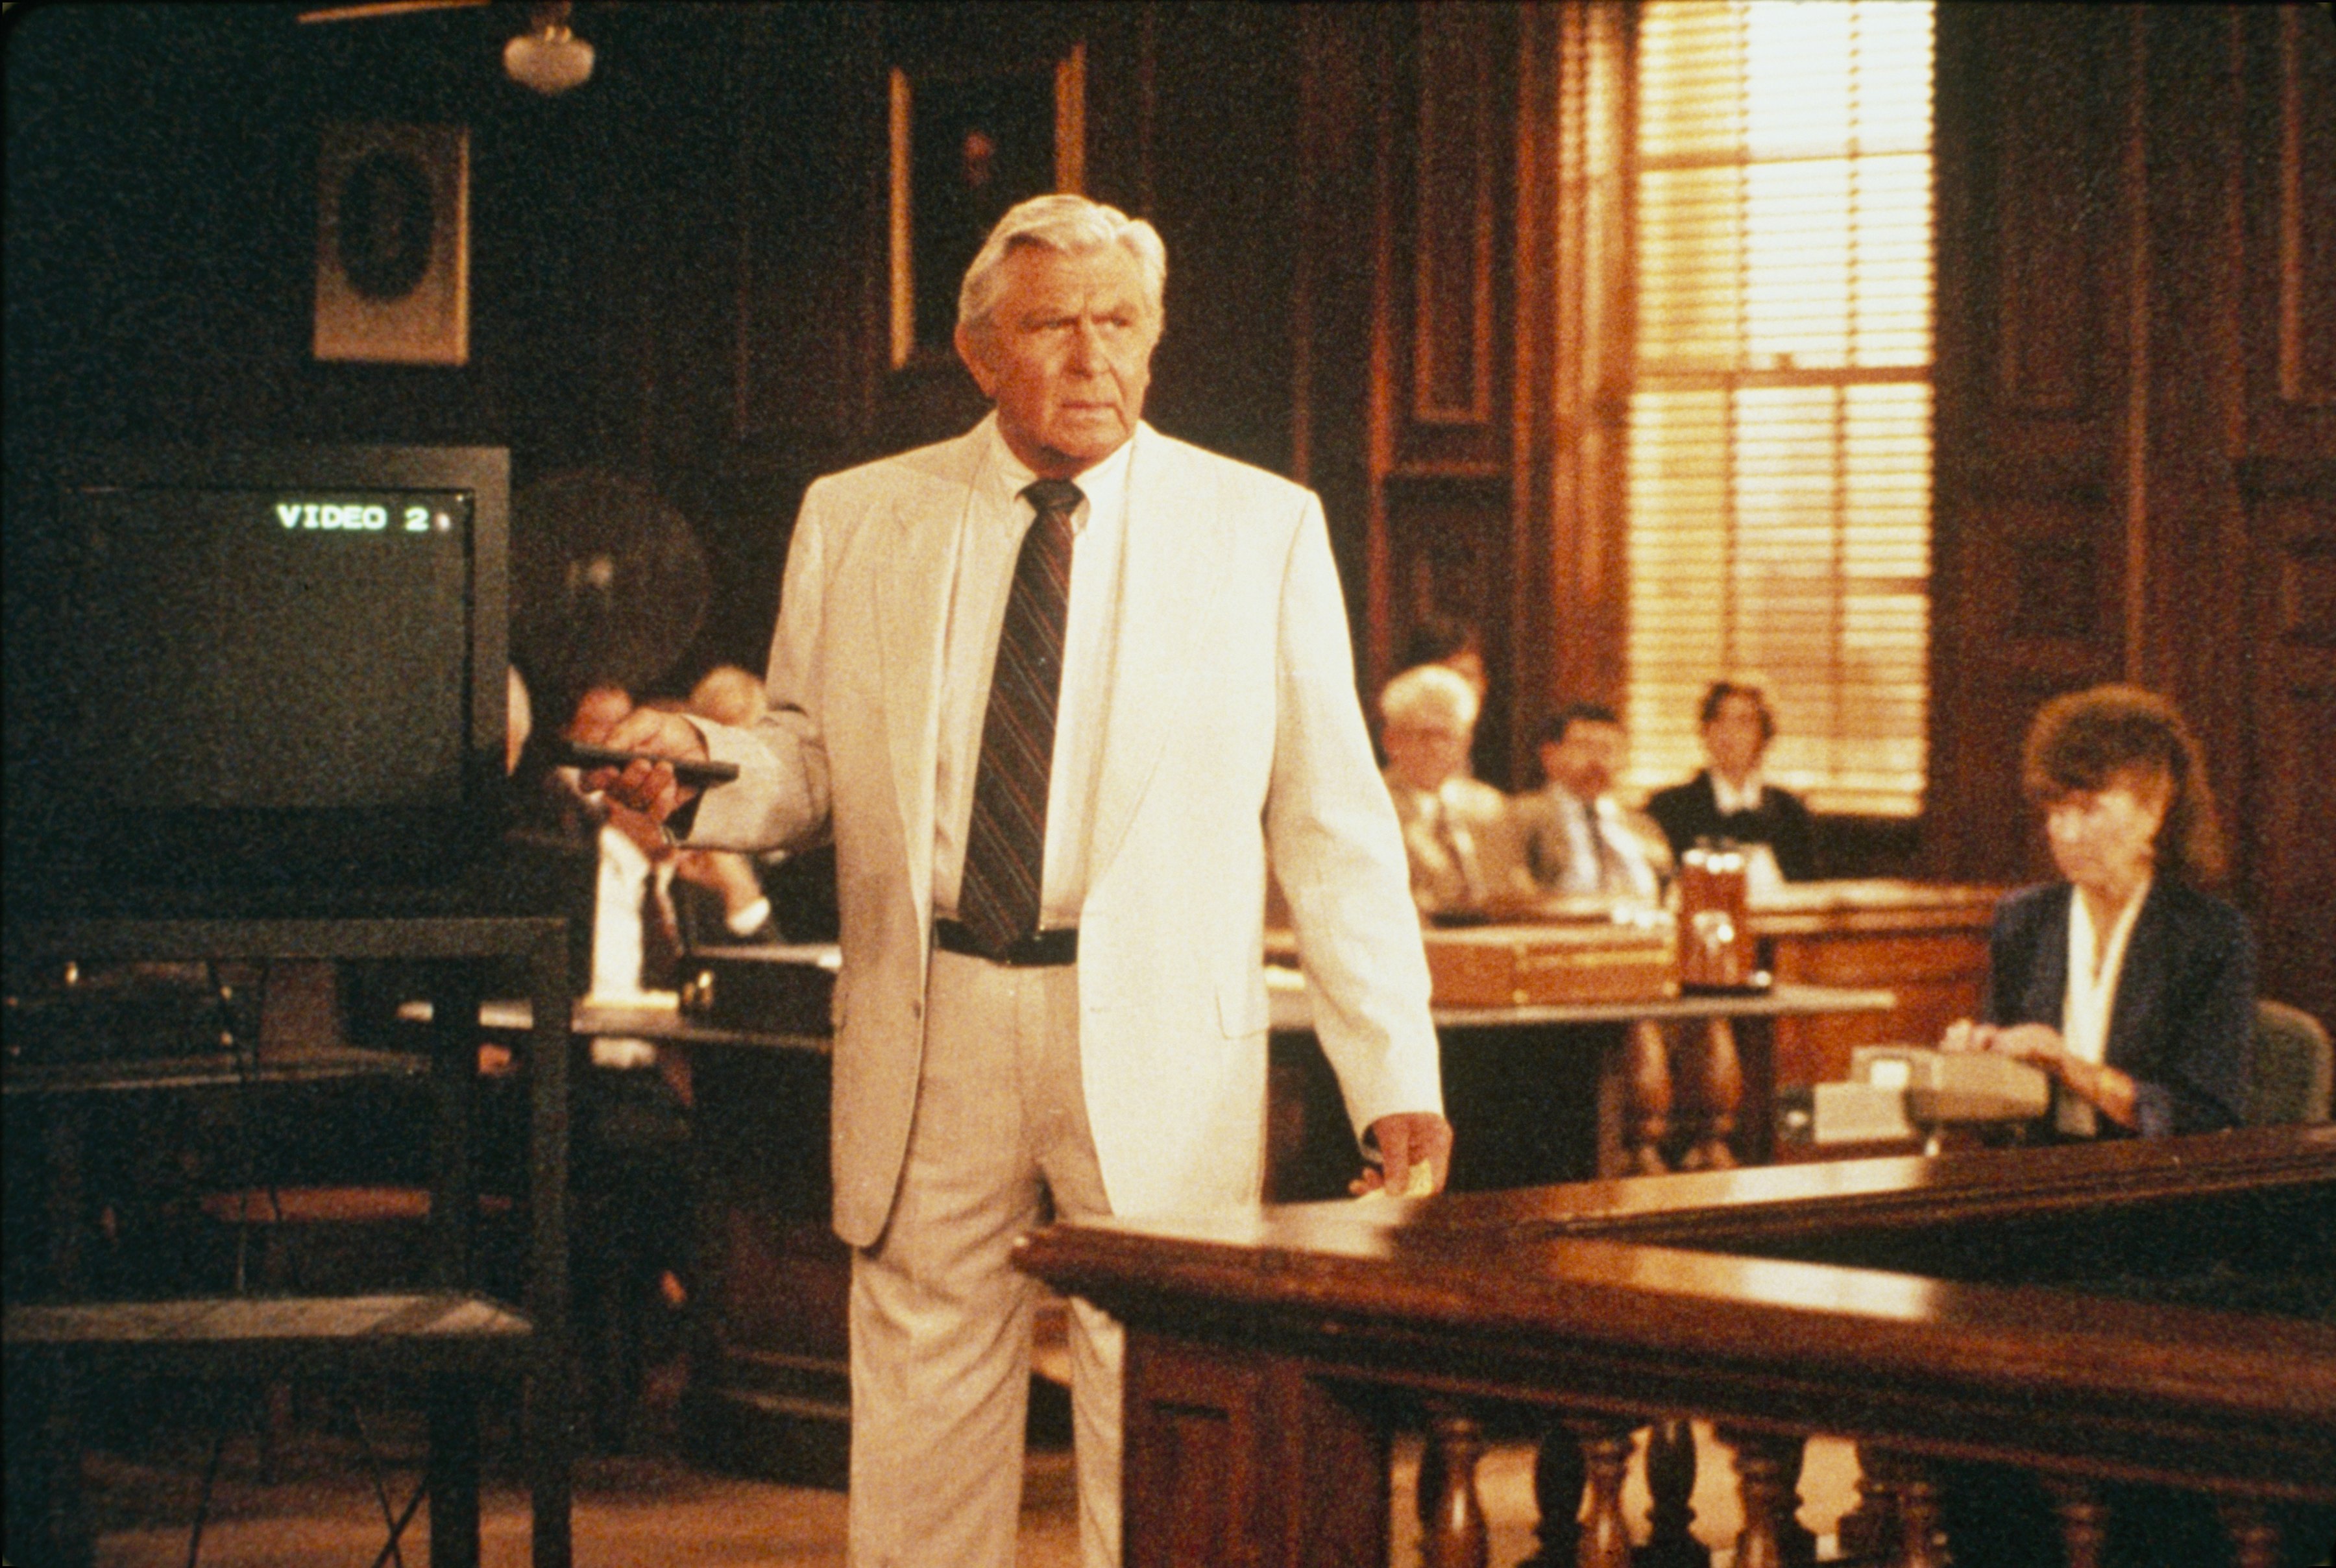 Andy Griffith is pictured addressing a courtroom as defense attorney Ben Matlock in a scene from 'Matlock', 1994